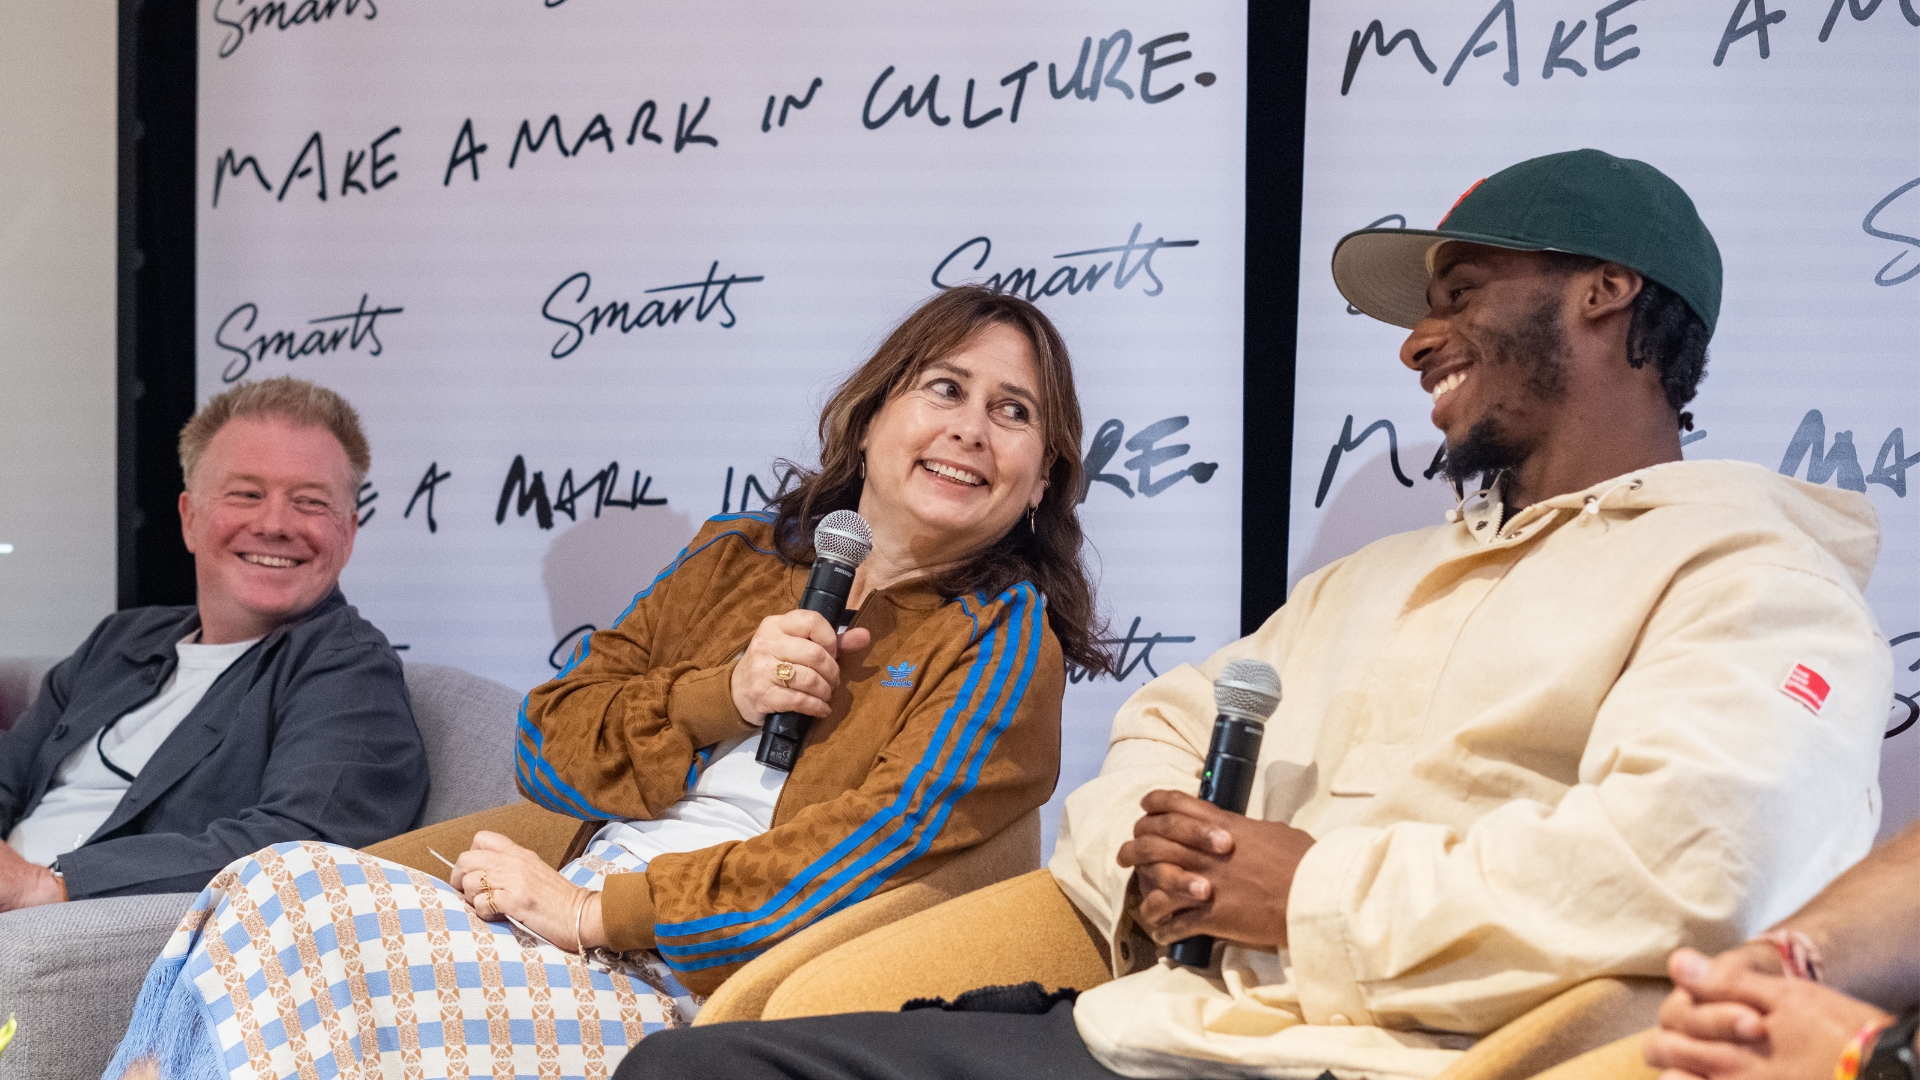 Three people holding microphones are engaged in a lively discussion while seated on stage with "MAKE A MARK IN CULTURE" and “SMARTS” logo banners in the background.